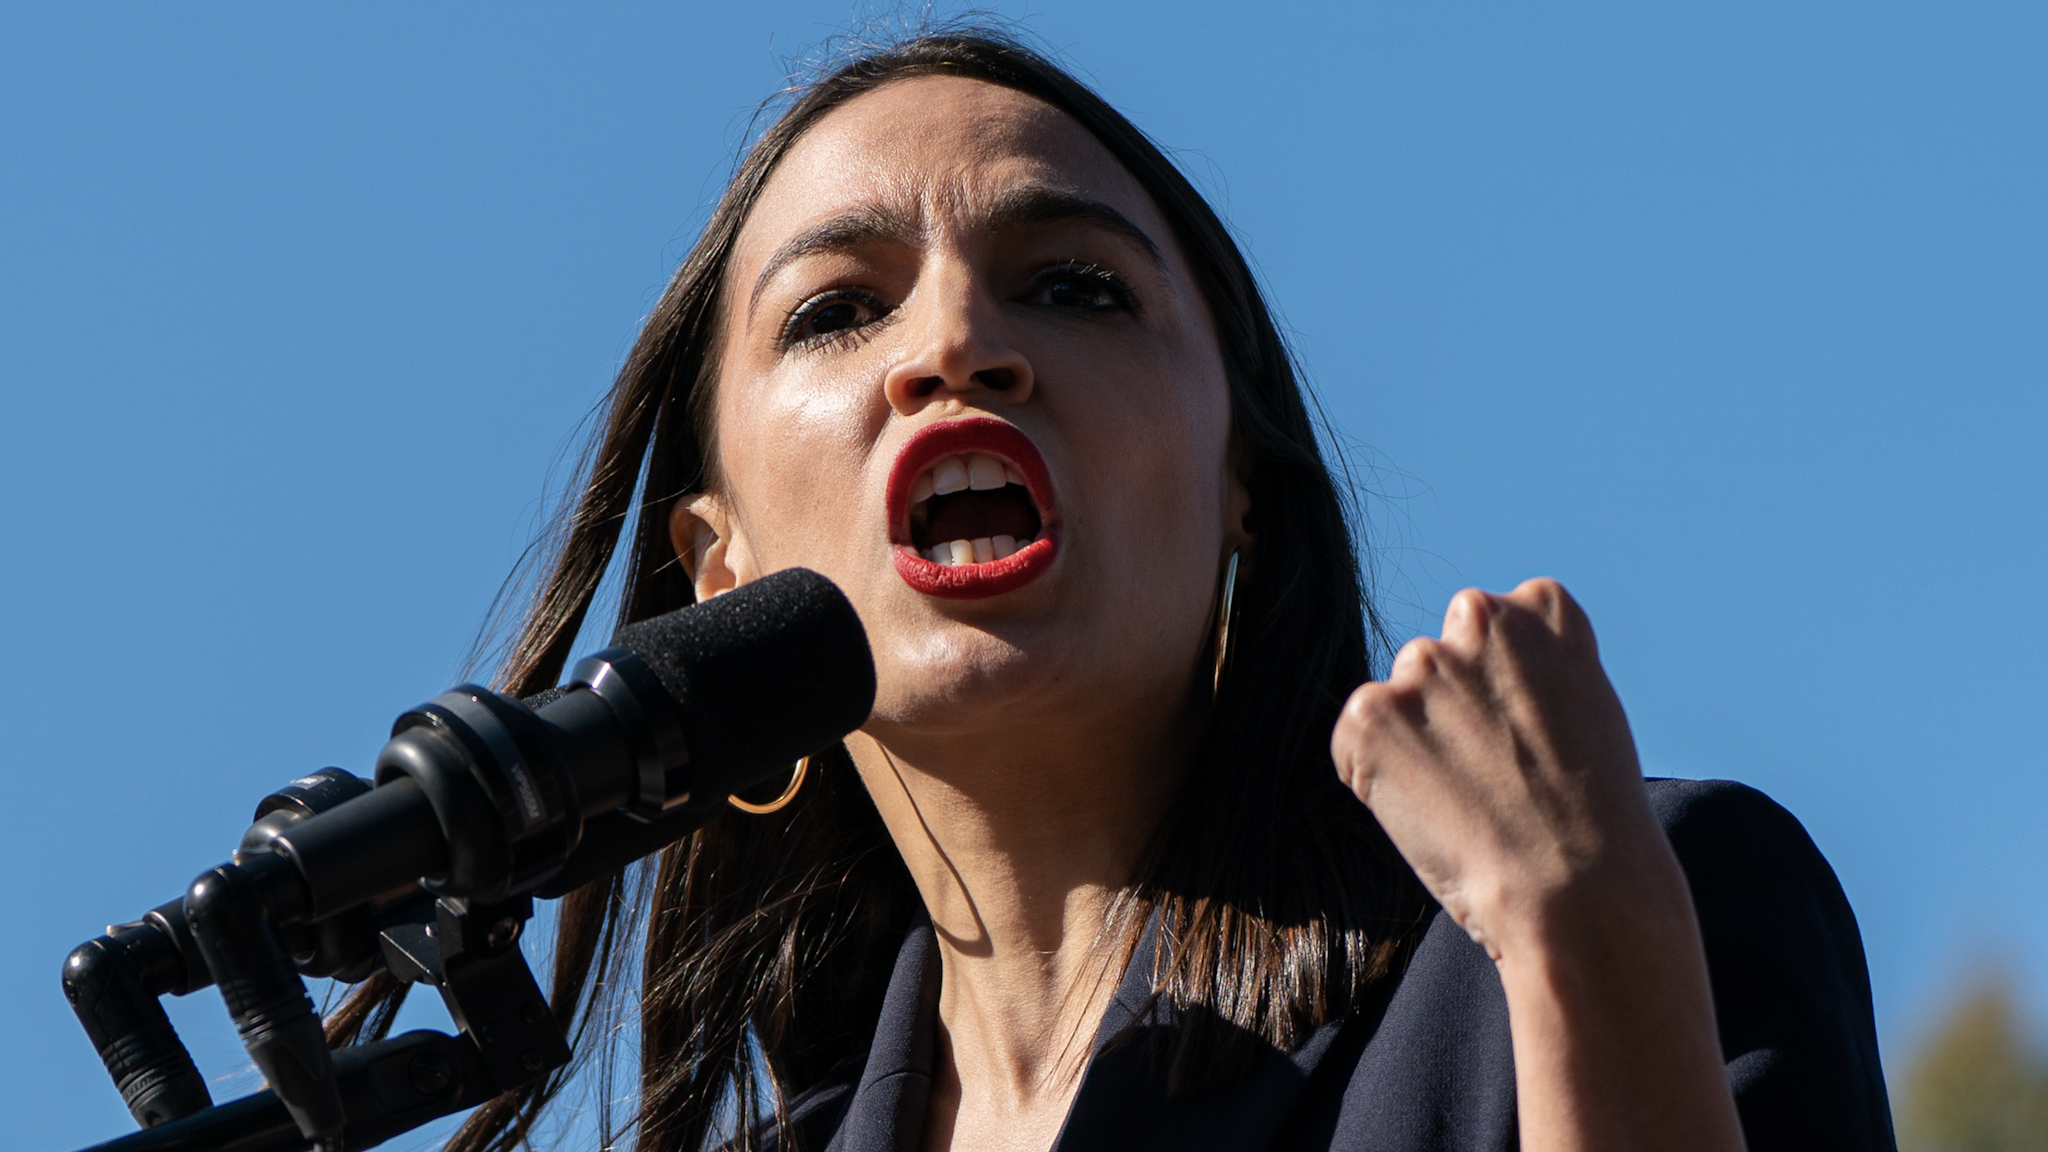 Representative Alexandria Ocasio-Cortez, a Democrat from New York, speaks during a rally in the Queens borough of New York, U.S., in Saturday, Oct. 19, 2019. Sanders, weeks after a heart attack that threatened to derail his campaign, is resetting his presidential bid on Saturday with a New York City rally and the endorsement of influential Ocasio-Cortez.